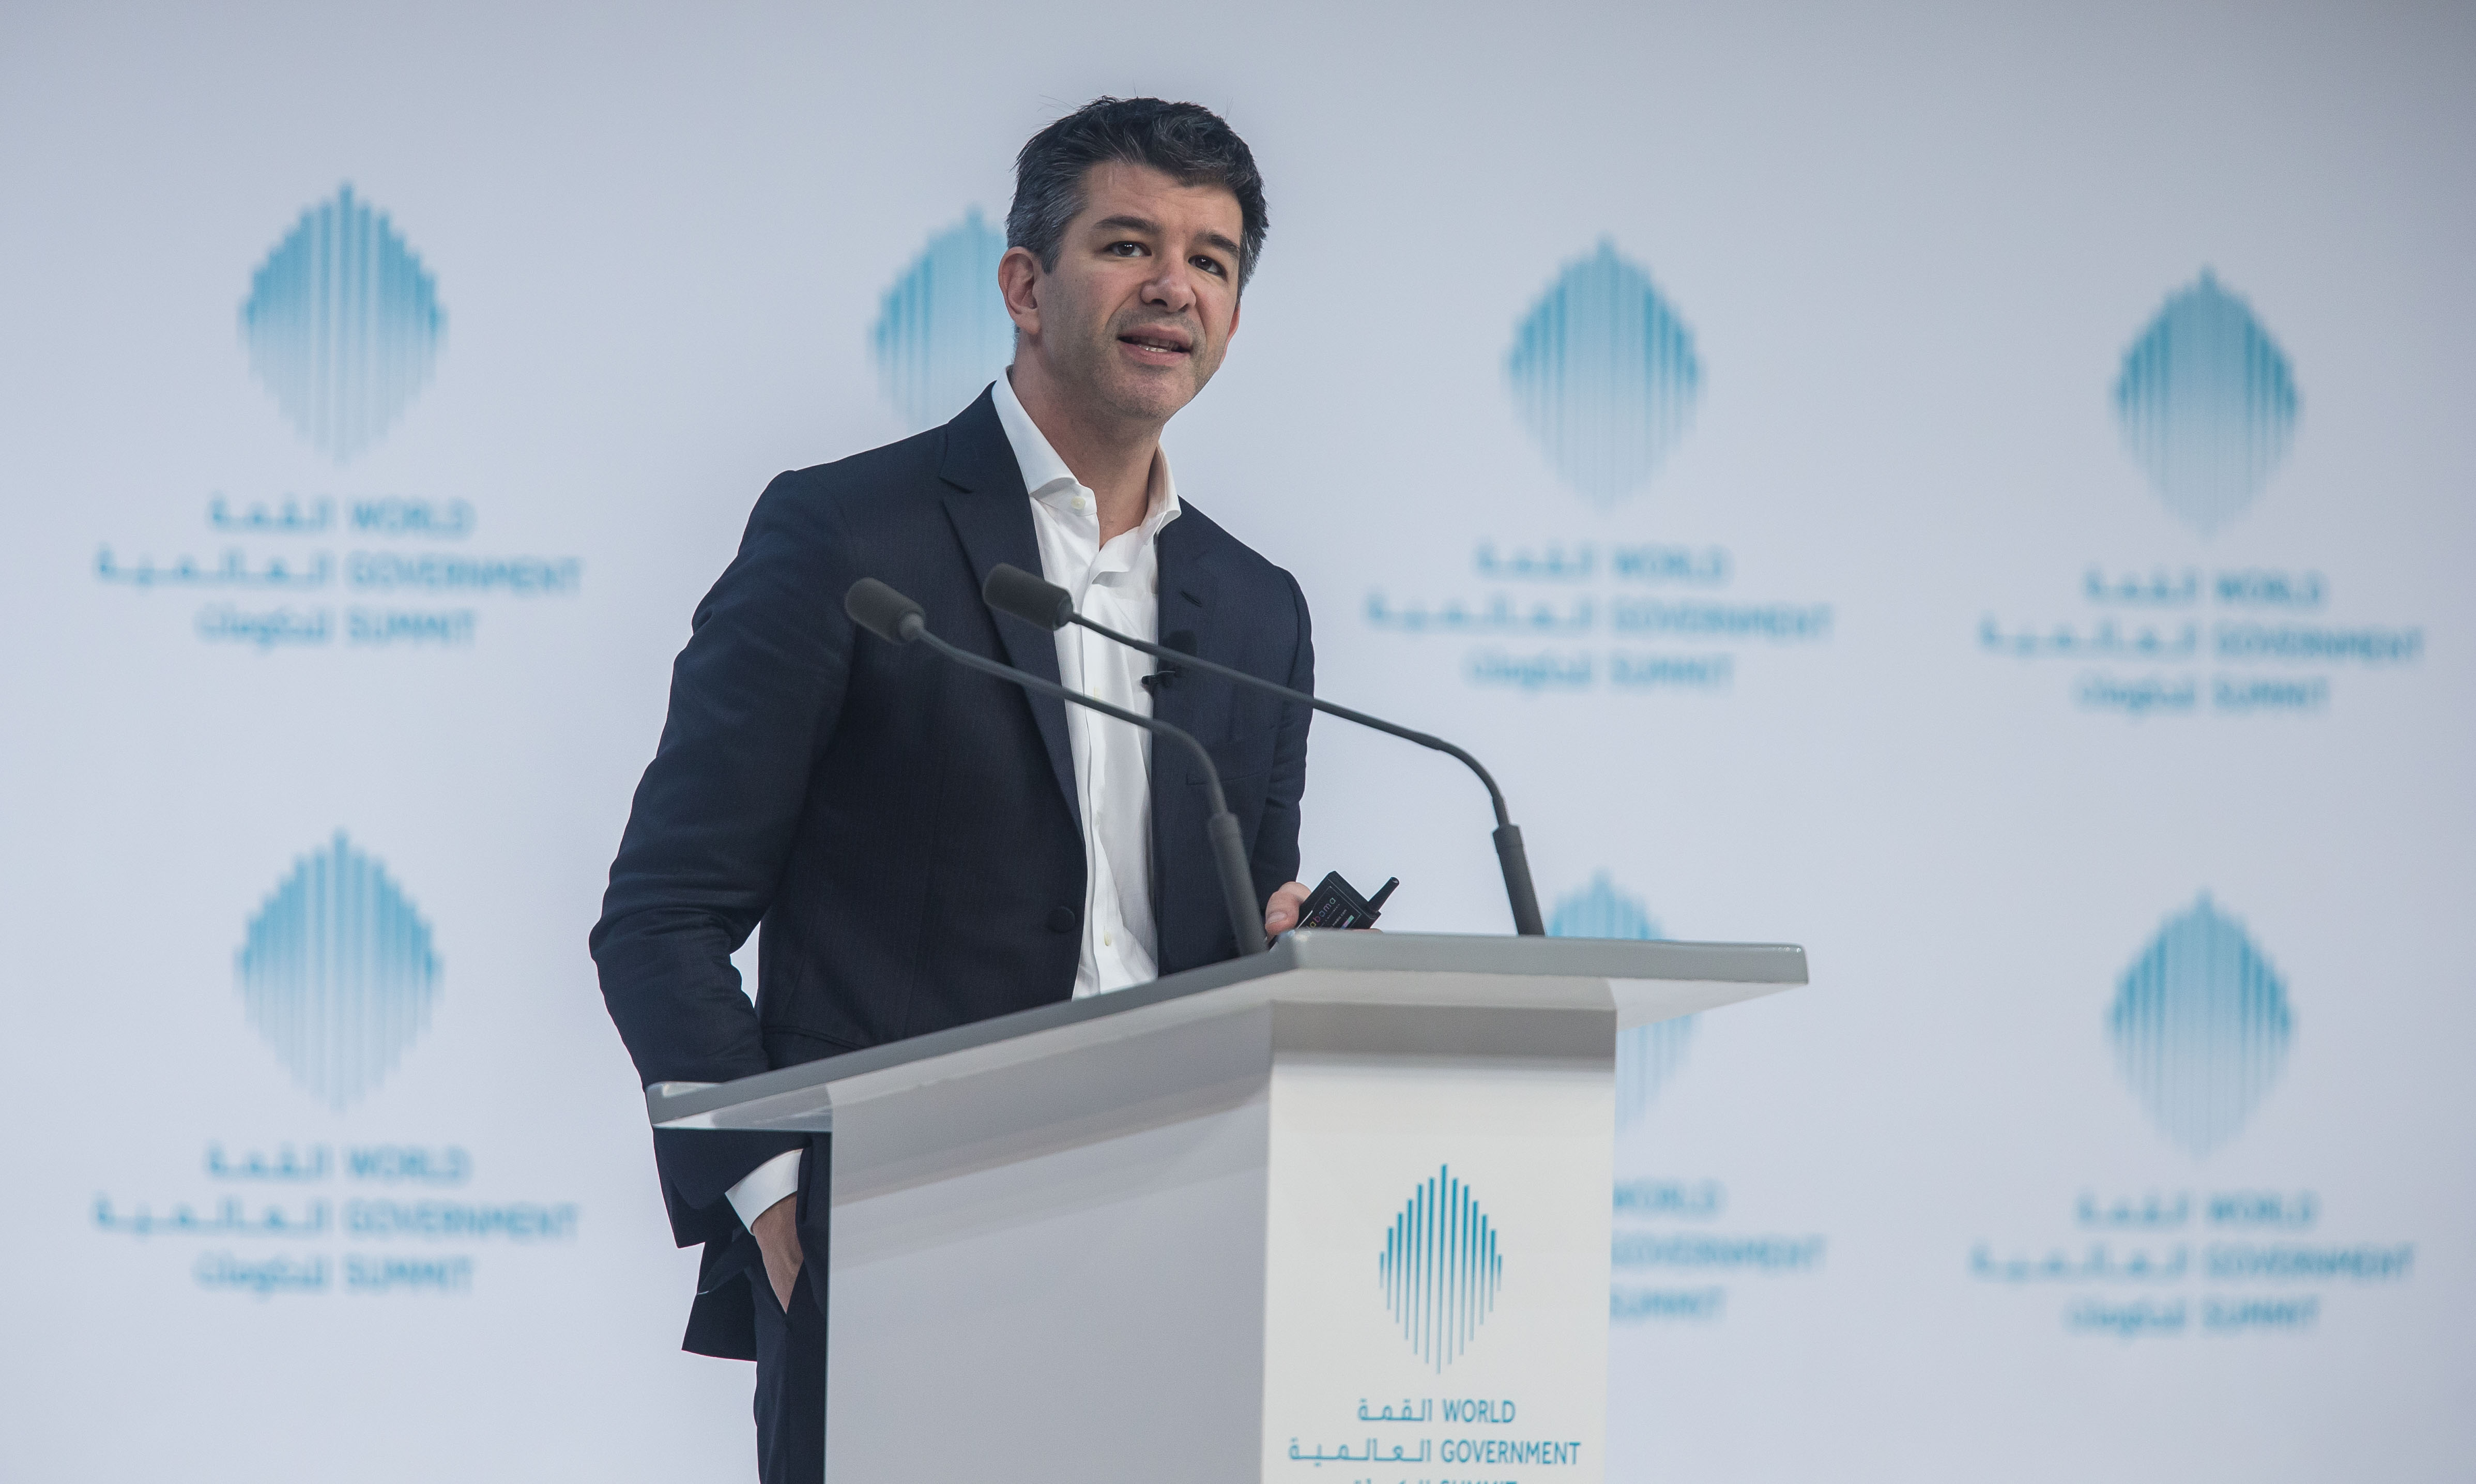 Traffic could be a thing of the past in five years, says Uber founder